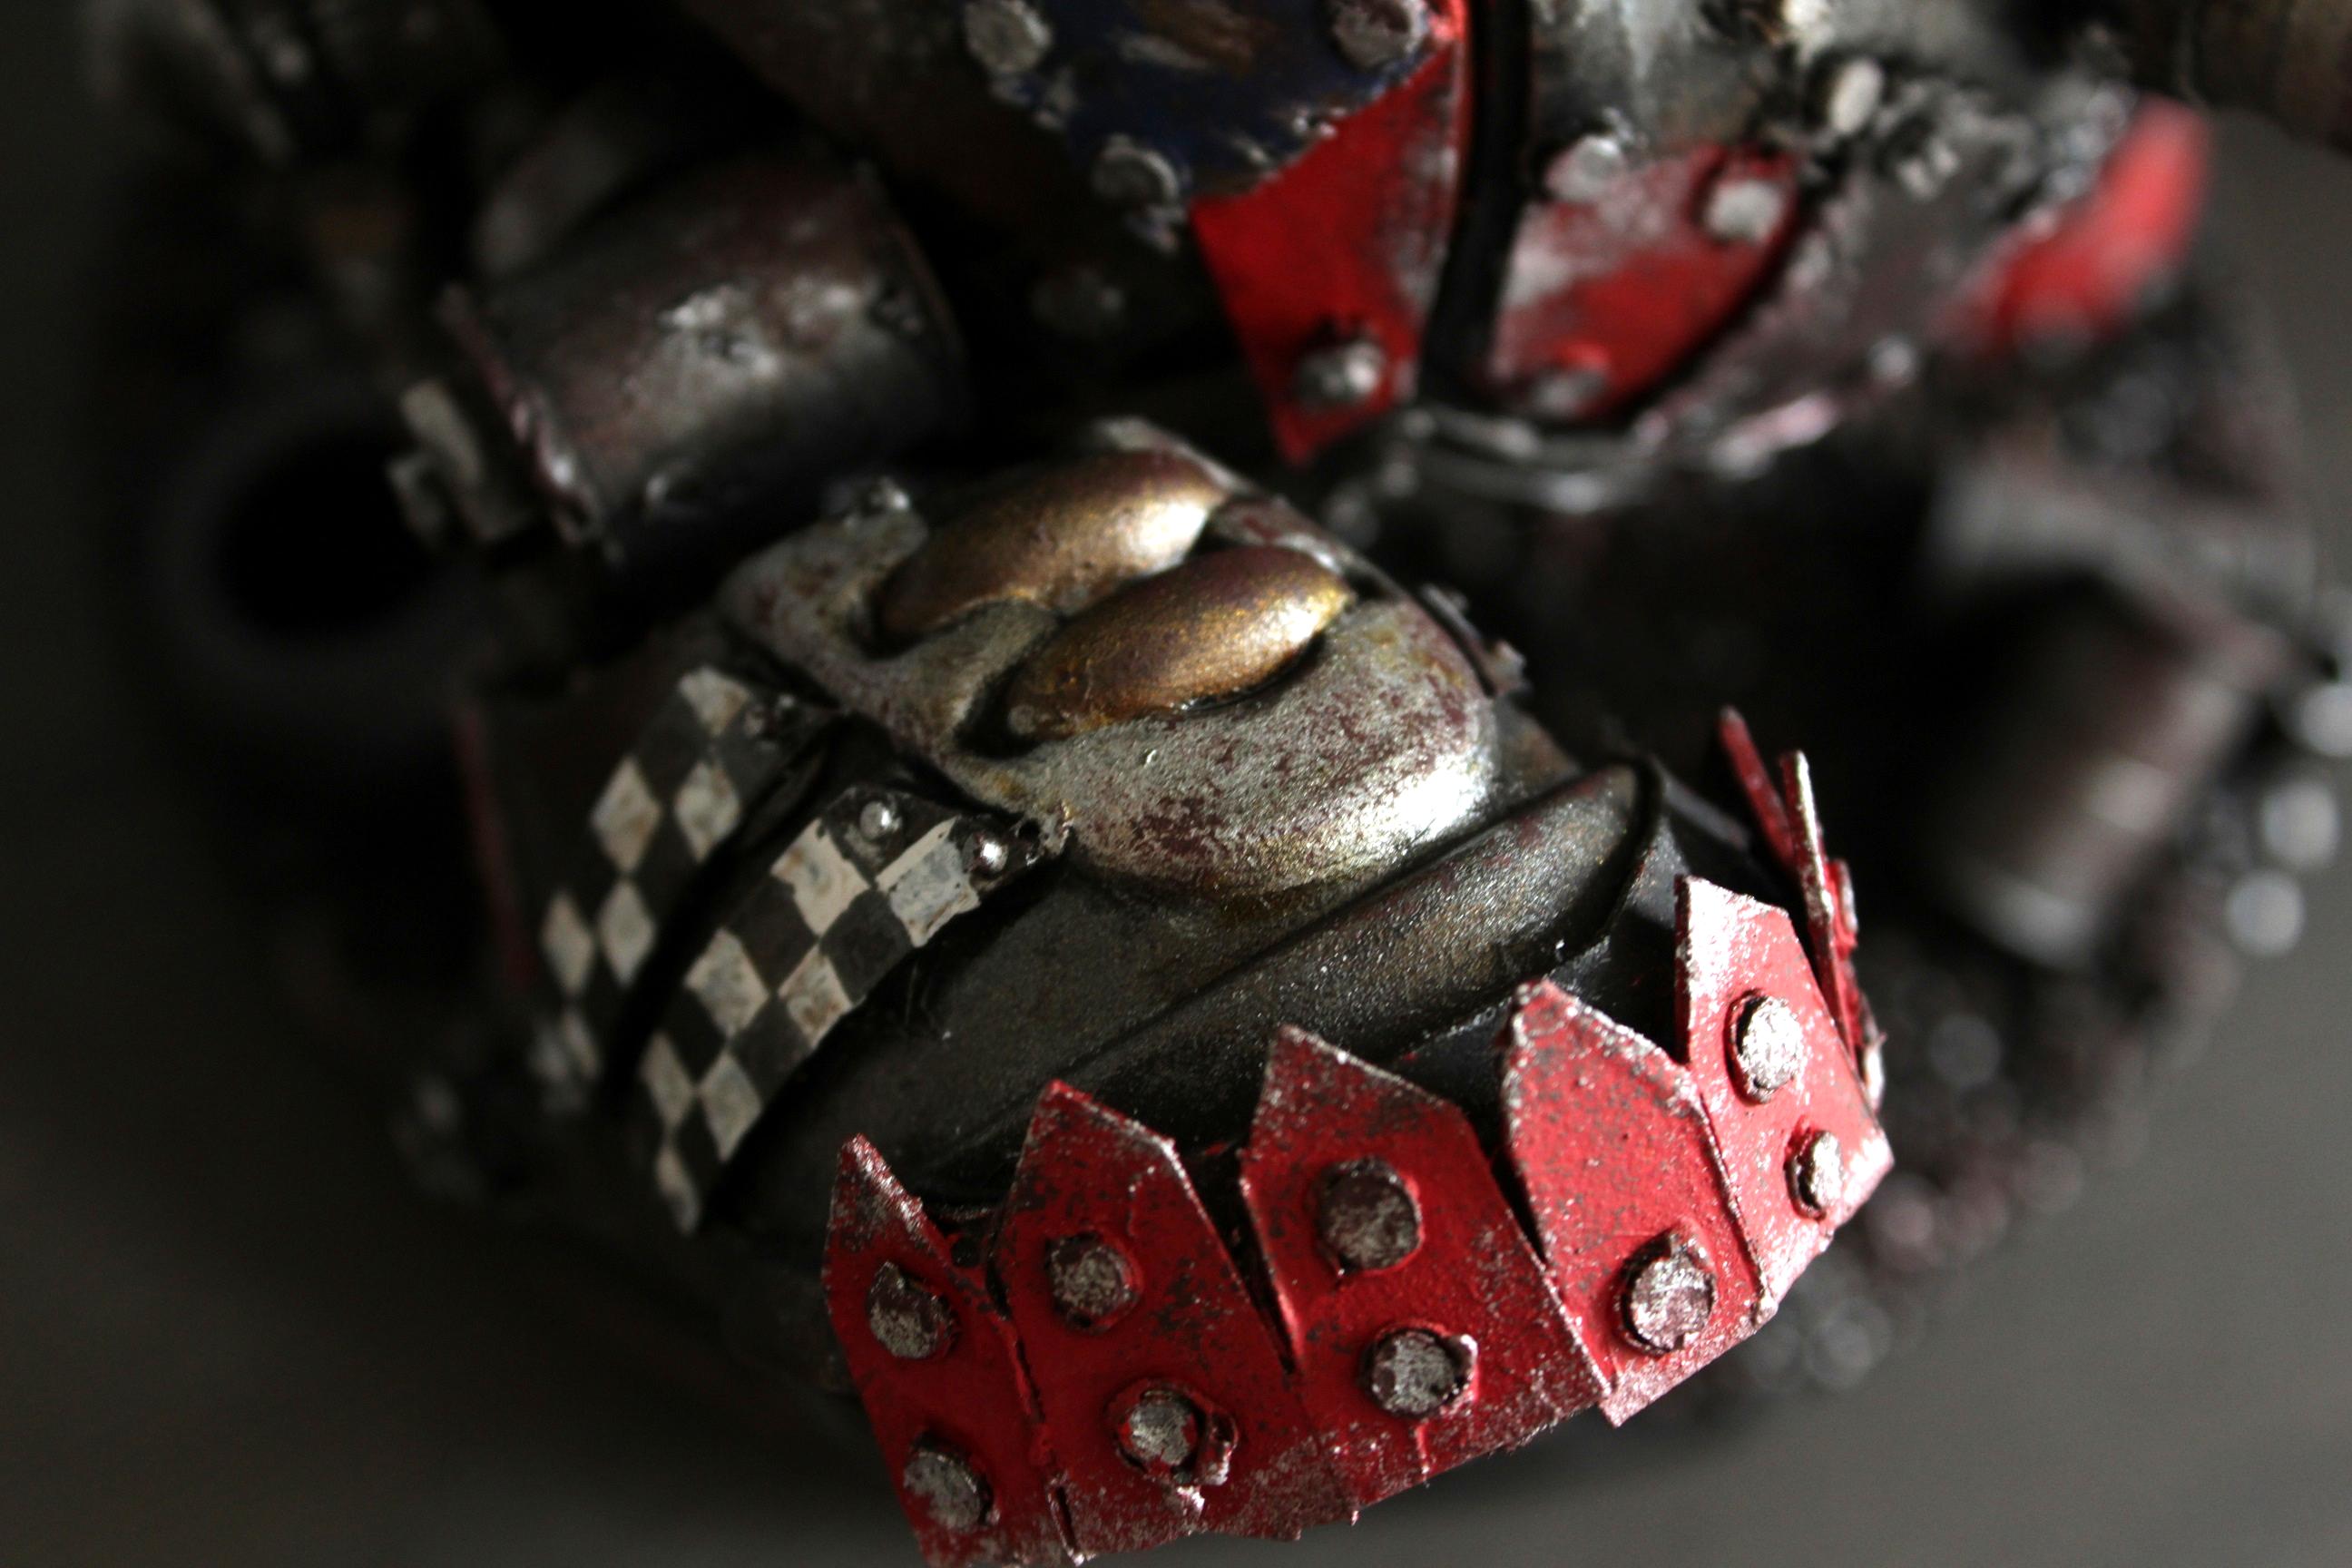 Armor, Chipping Effect, Conversion, Goffs, Ork Stompa, Ork Vehicles, Orks, Paint Chipping, Potato Head, Potato Head Stompa, Scratch Build, Stompa, Super Heavy Spud, Super-heavy, Tater Titan, Titan, Walker, Weathered